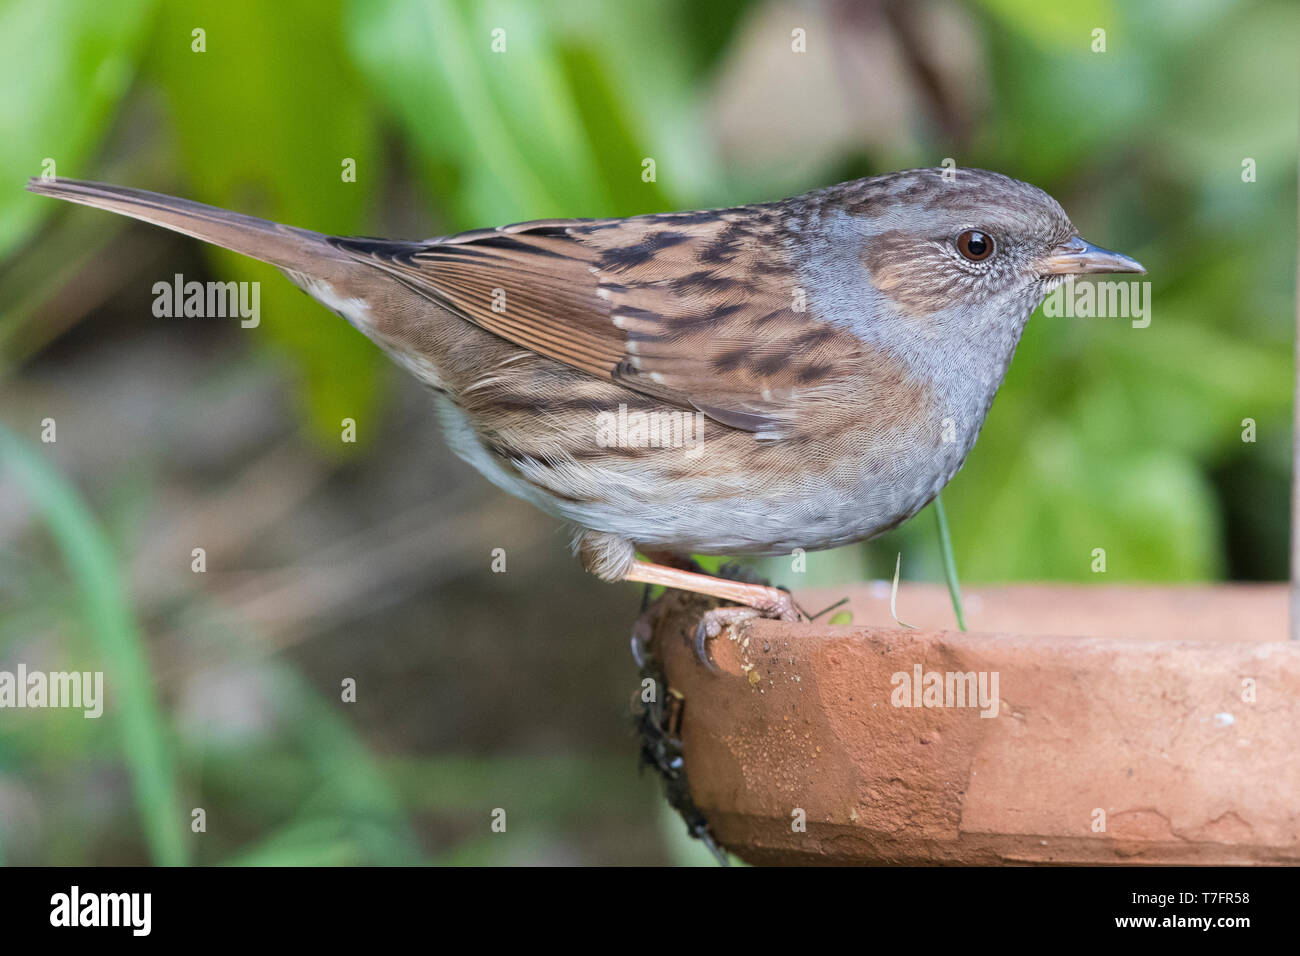 Dunnock (Prunella modularis), adult perched on a vase Stock Photo